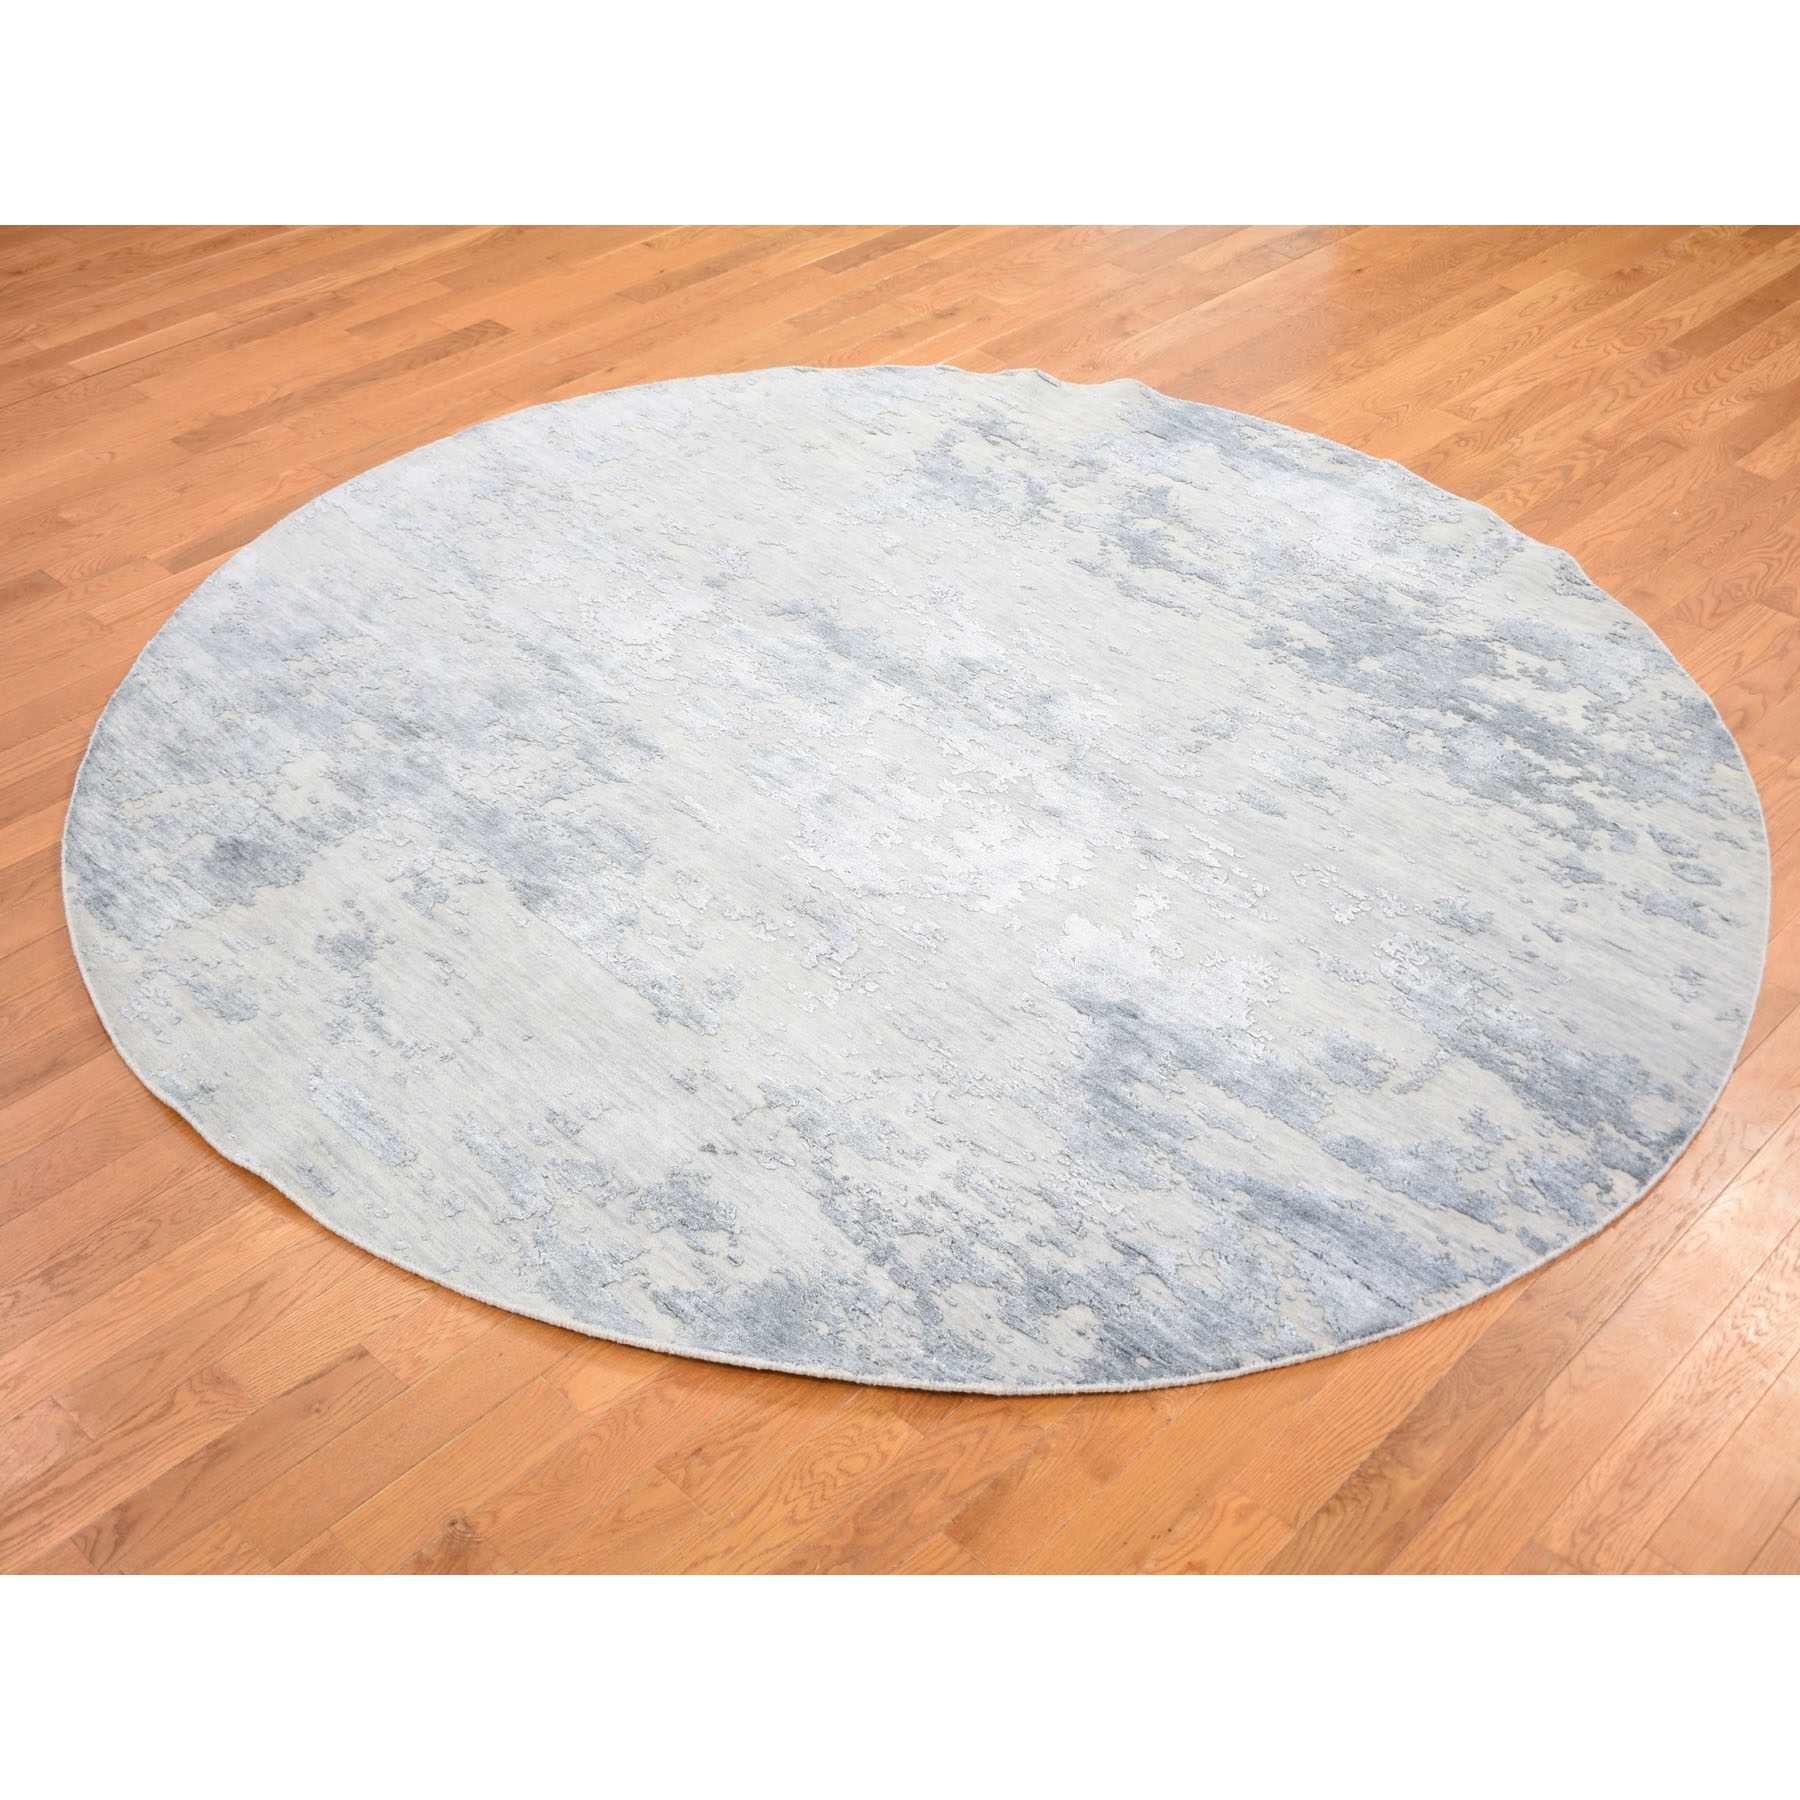 7'10"x7'10" Round Abstract Design Wool And Silk Hi-Low Pile Denser Weave Hand Woven Oriental Rug 